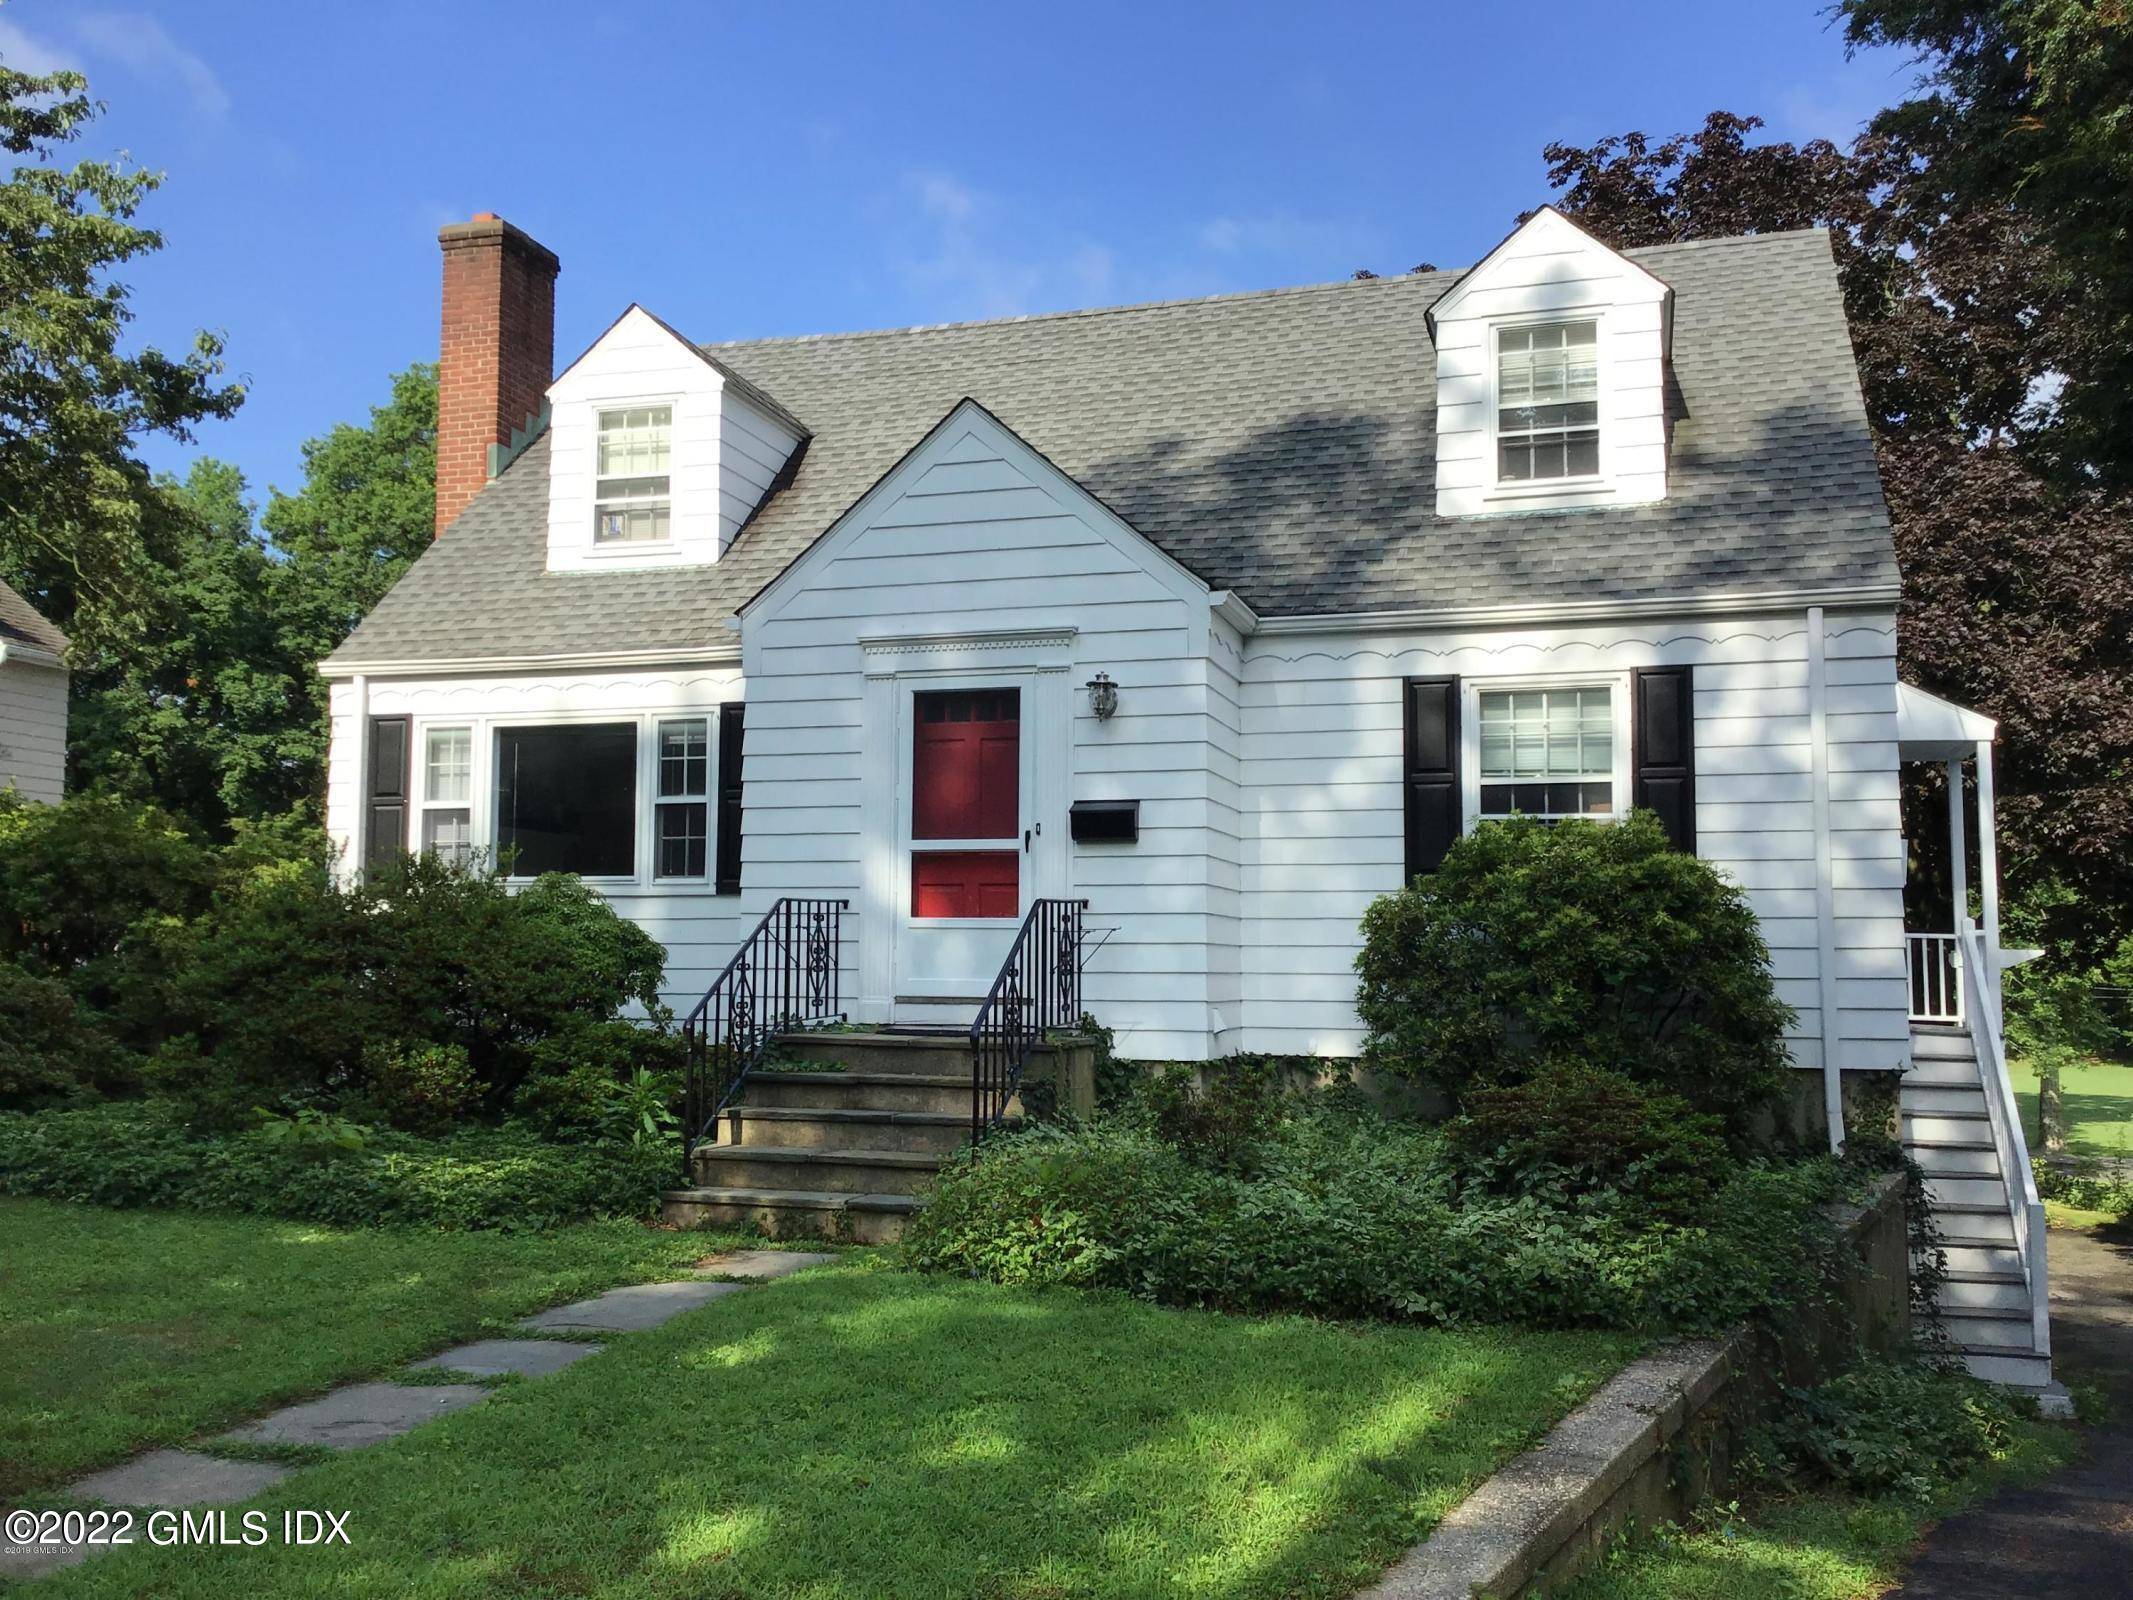 7 Butler St is a sunny colonial with charming details and recent updates.